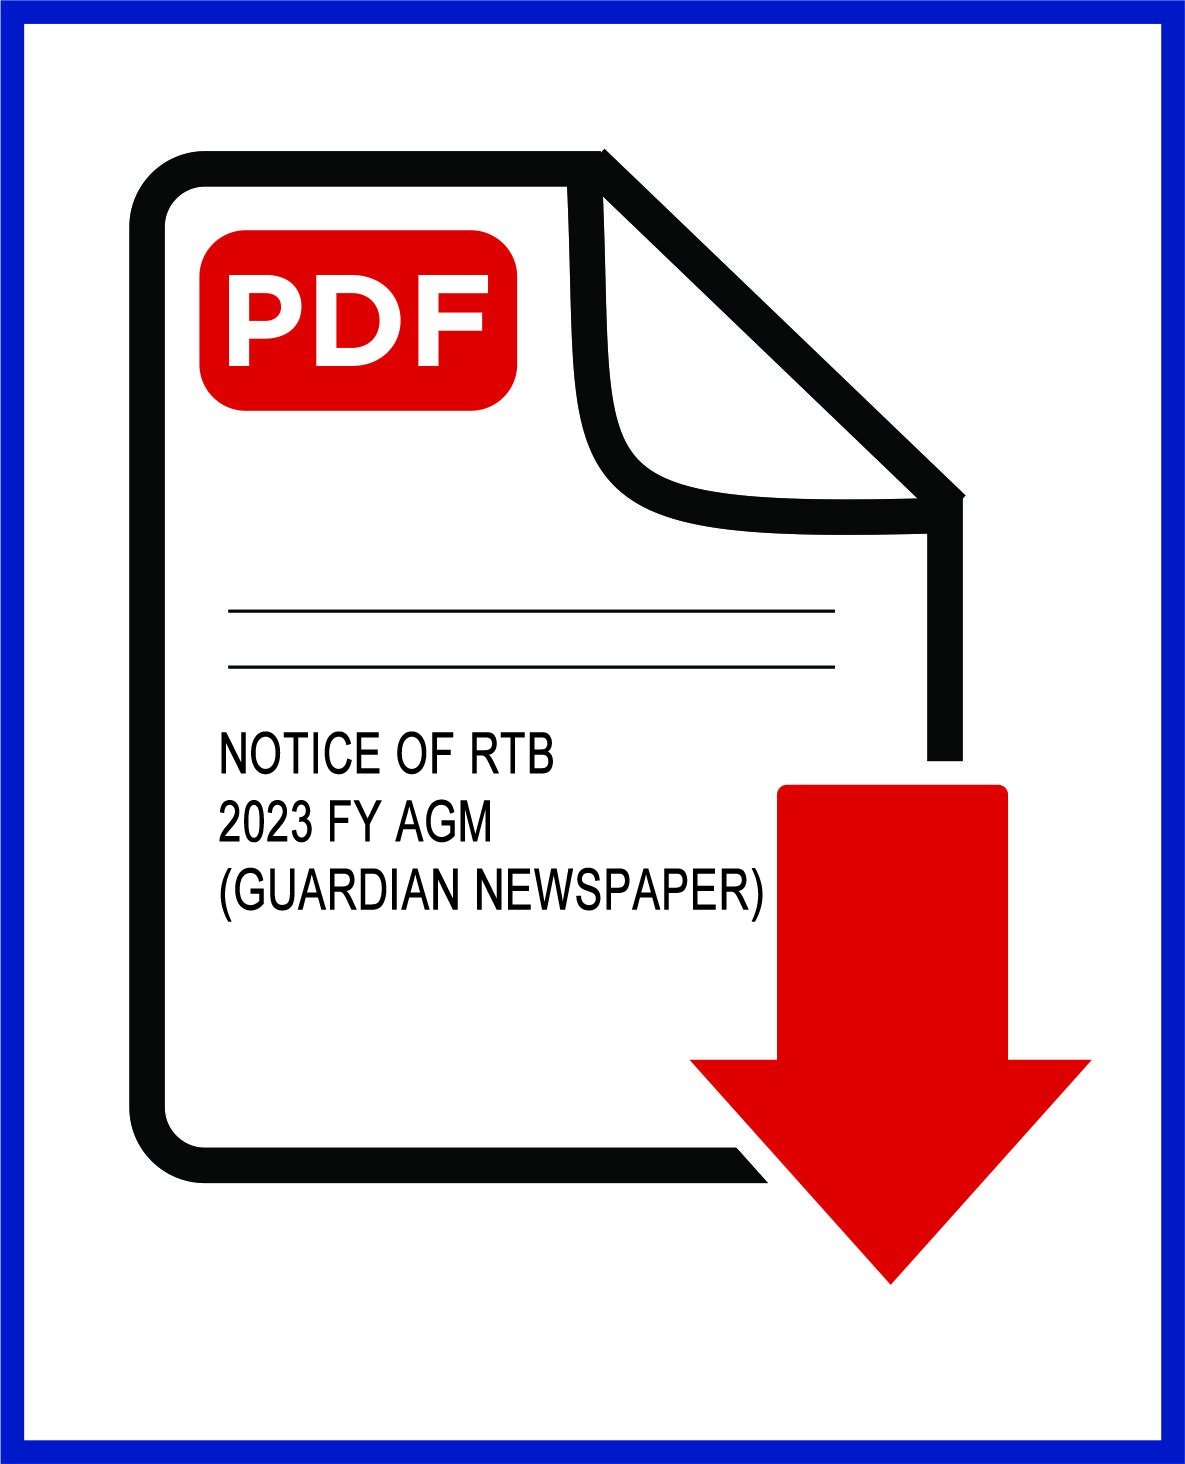 NOTICE OF RTB 2023 FY AGM (GUARDIAN NEWSPAPER)